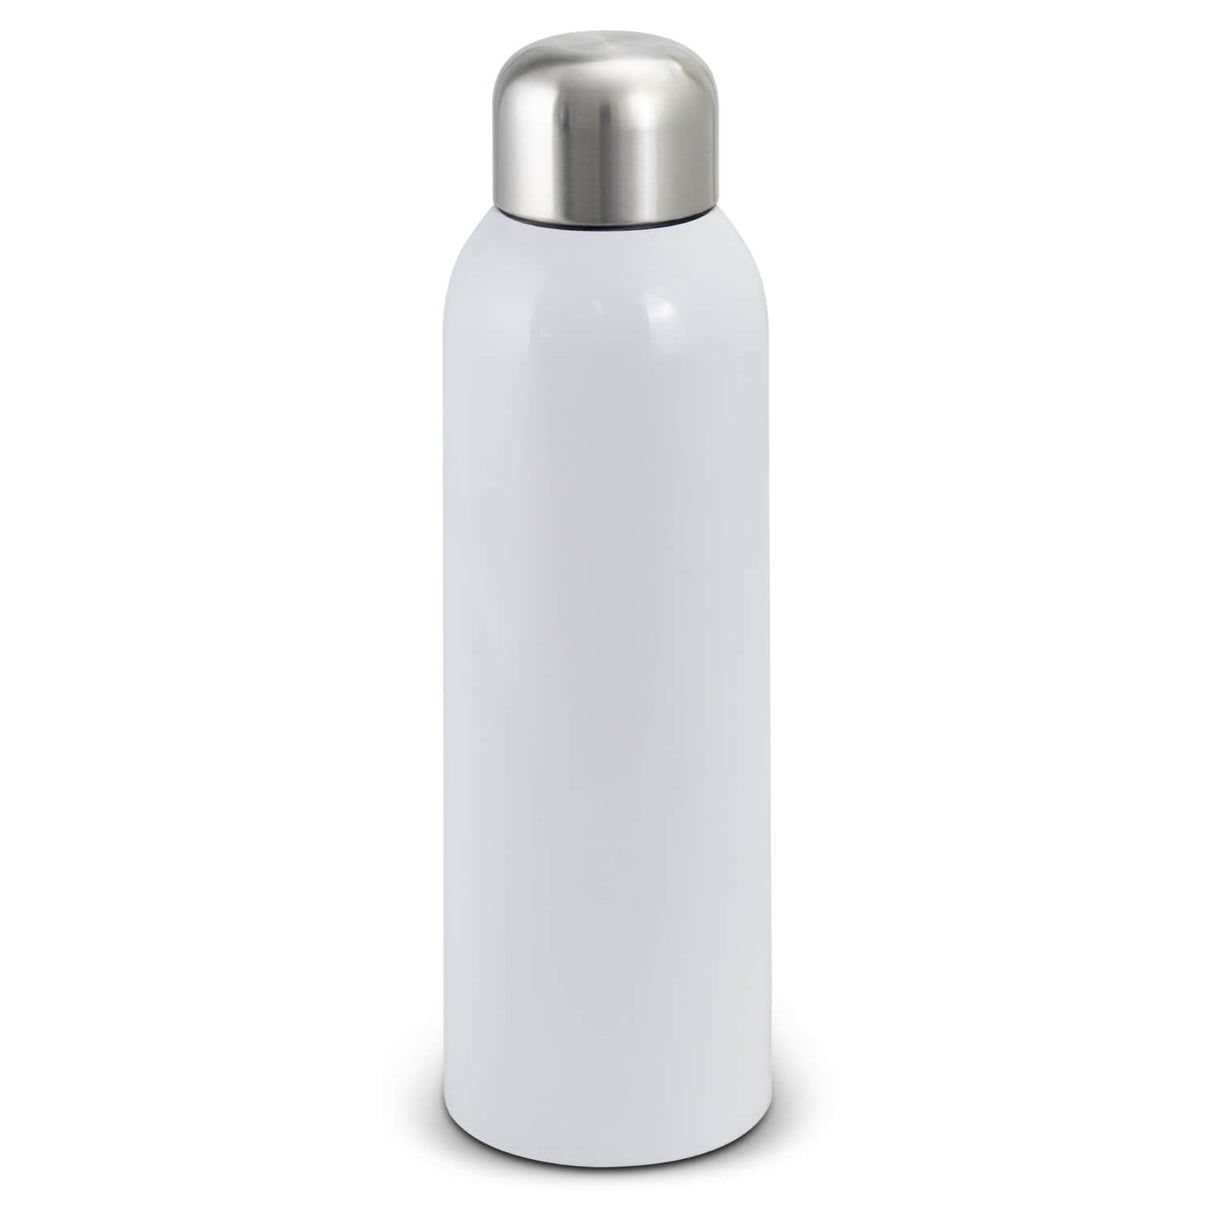 Classic Stainless Steel Drink Bottle 800ml - Engraved